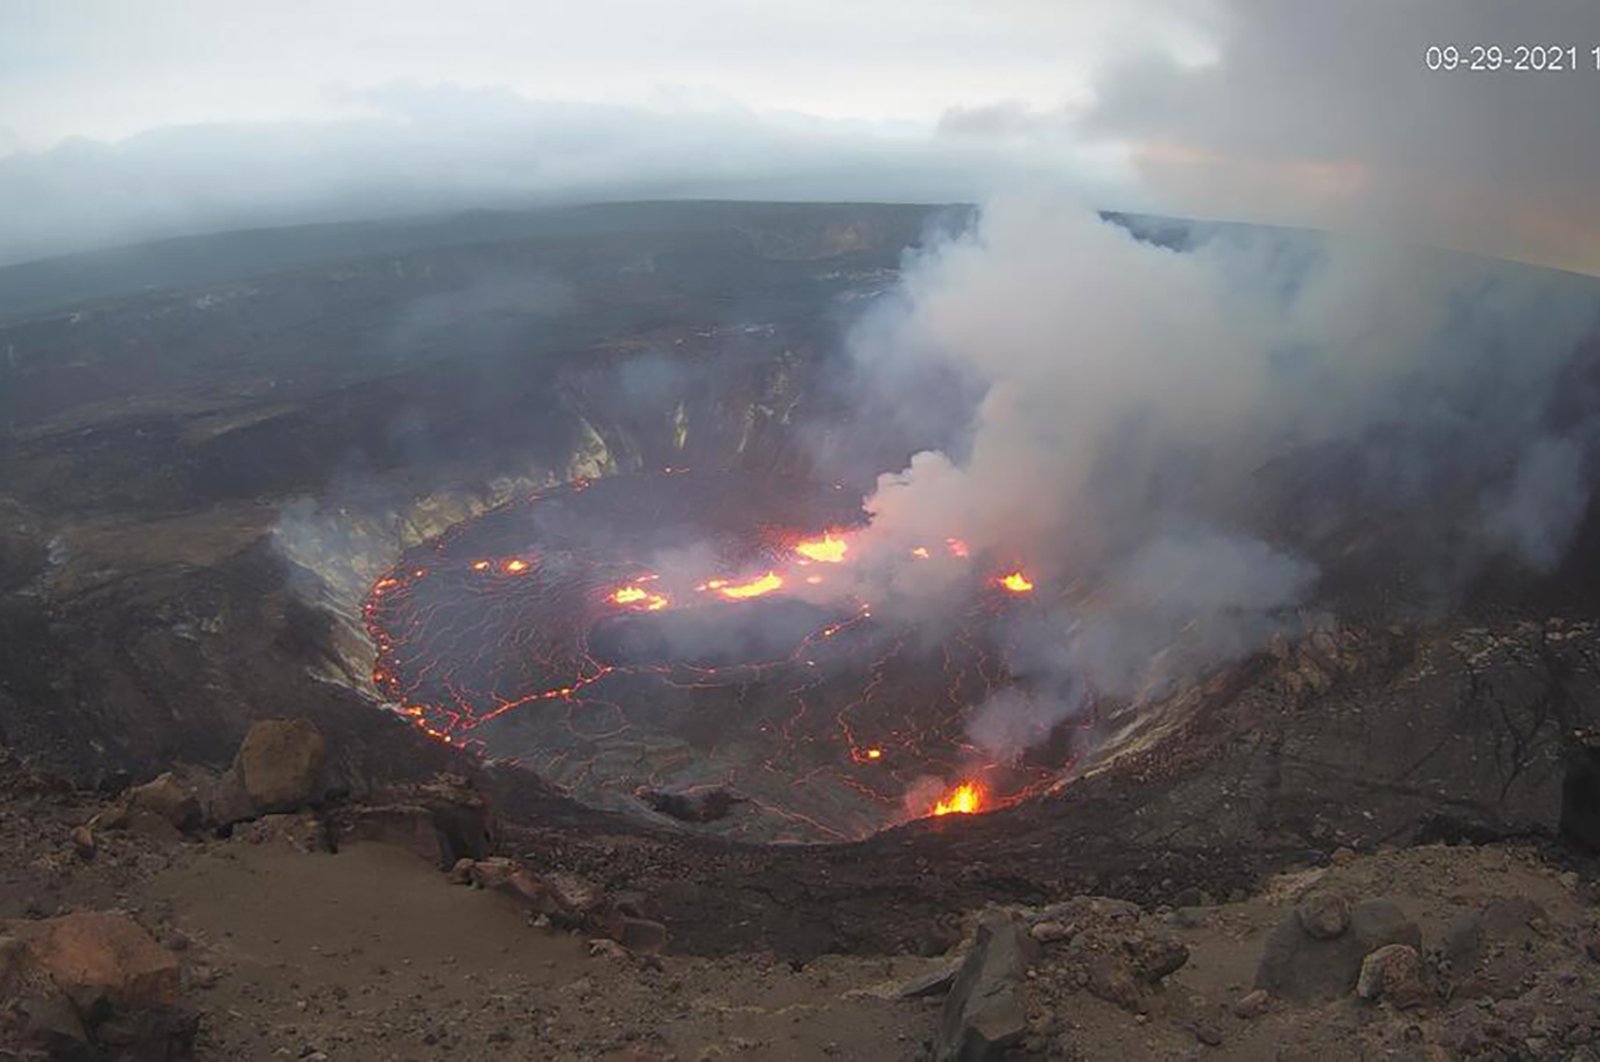 This webcam image provided by the United States Geological Survey shows a view of an eruption that has begun in the Halemaumau crater at the summit of Hawaii’s Kilauea volcano, Sept. 29, 2021. (USGS via AP)